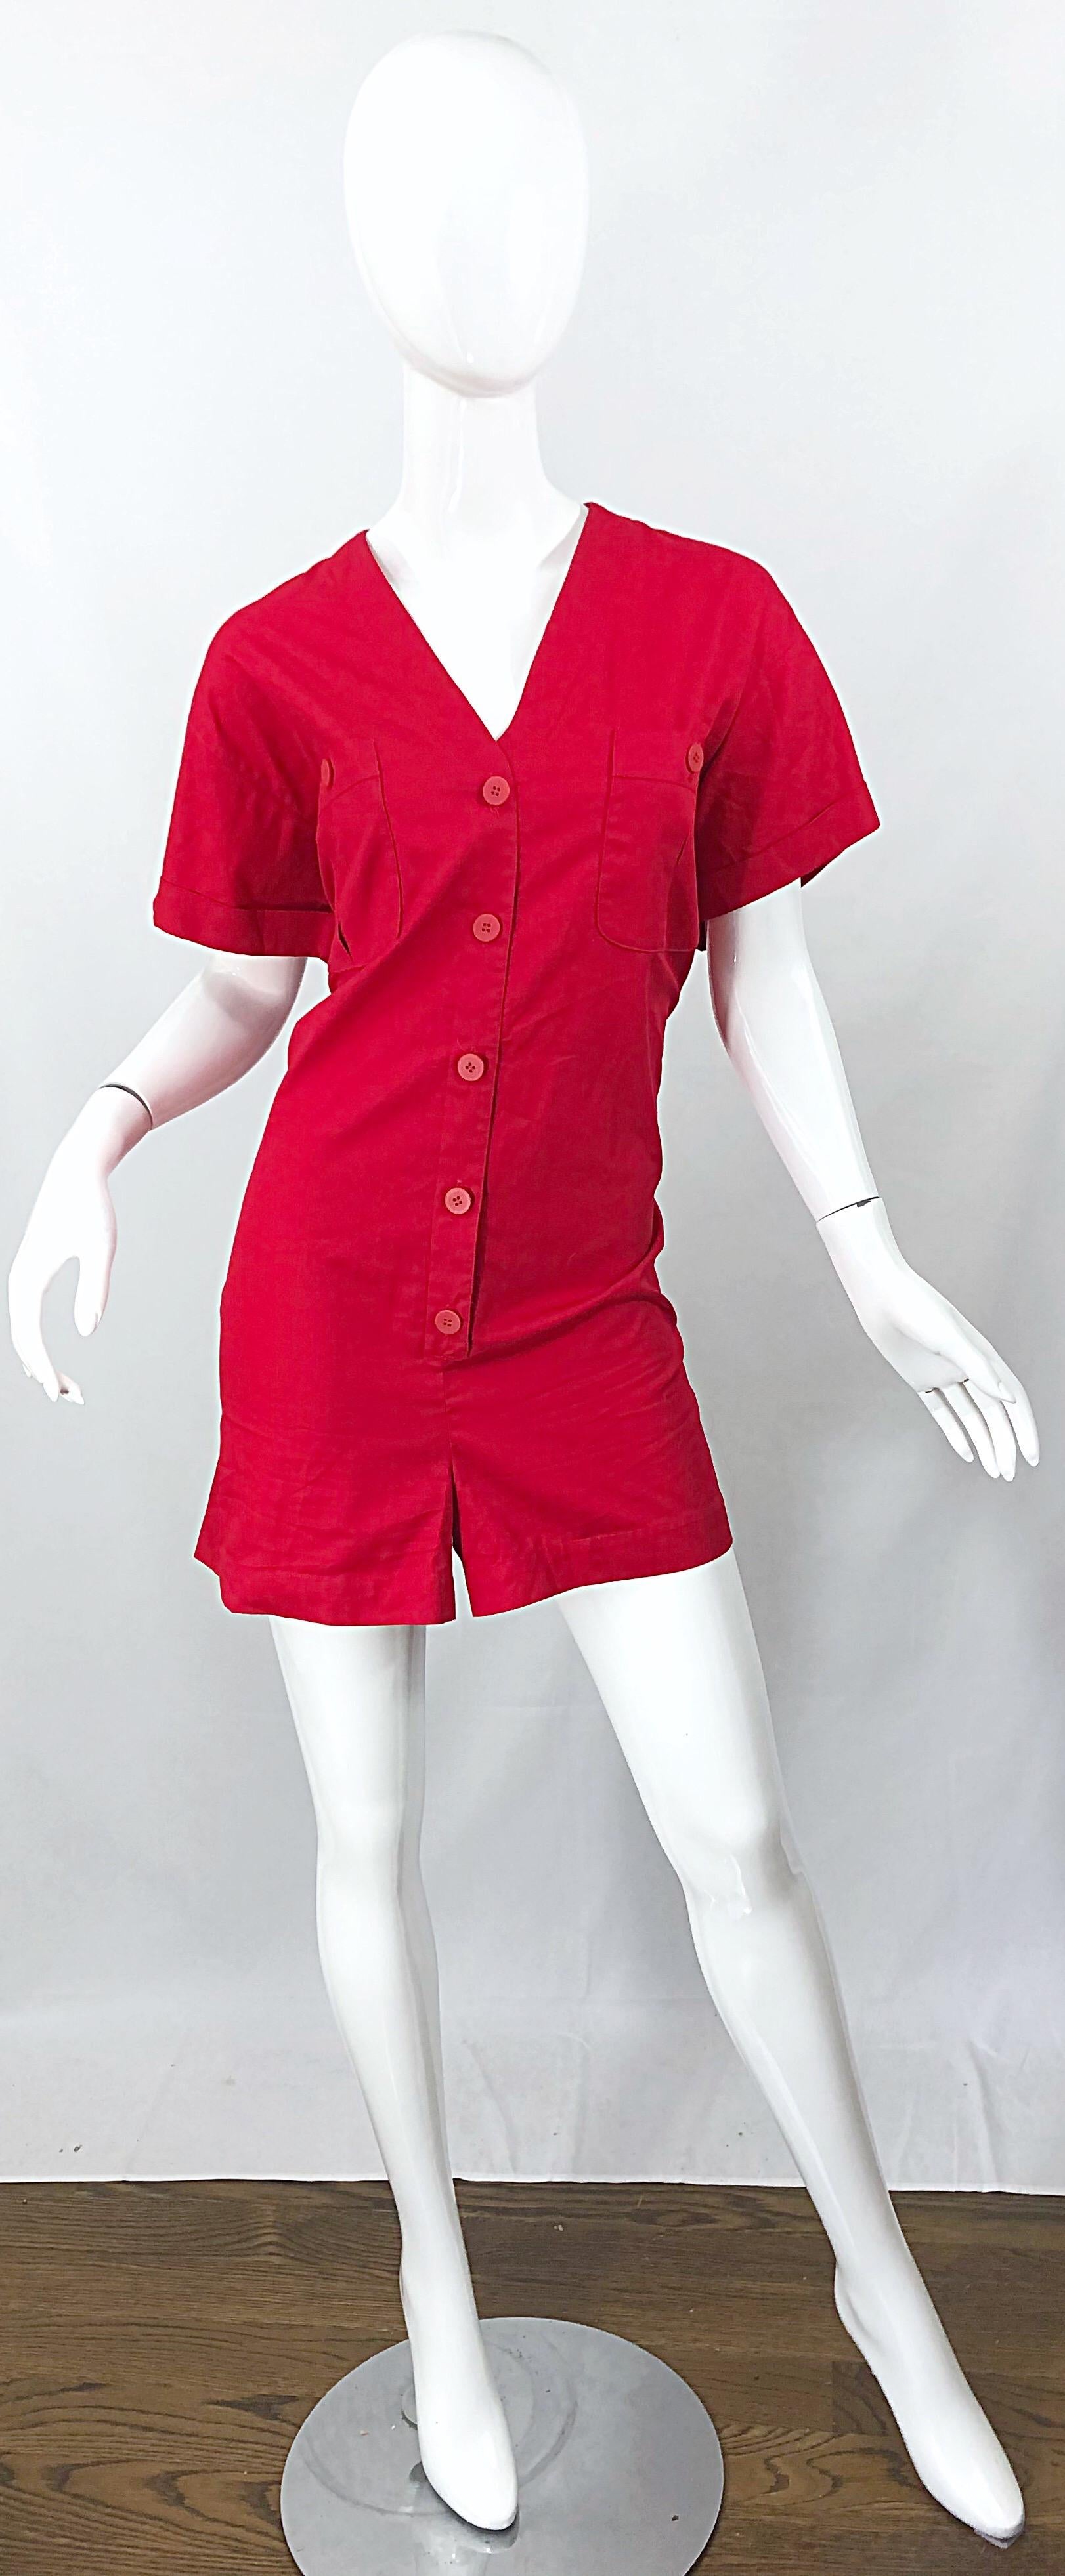 NWT Vintage Christian Dior Romper Size 14 Lipstick Red Cotton One Piece Jumpsuit For Sale 5